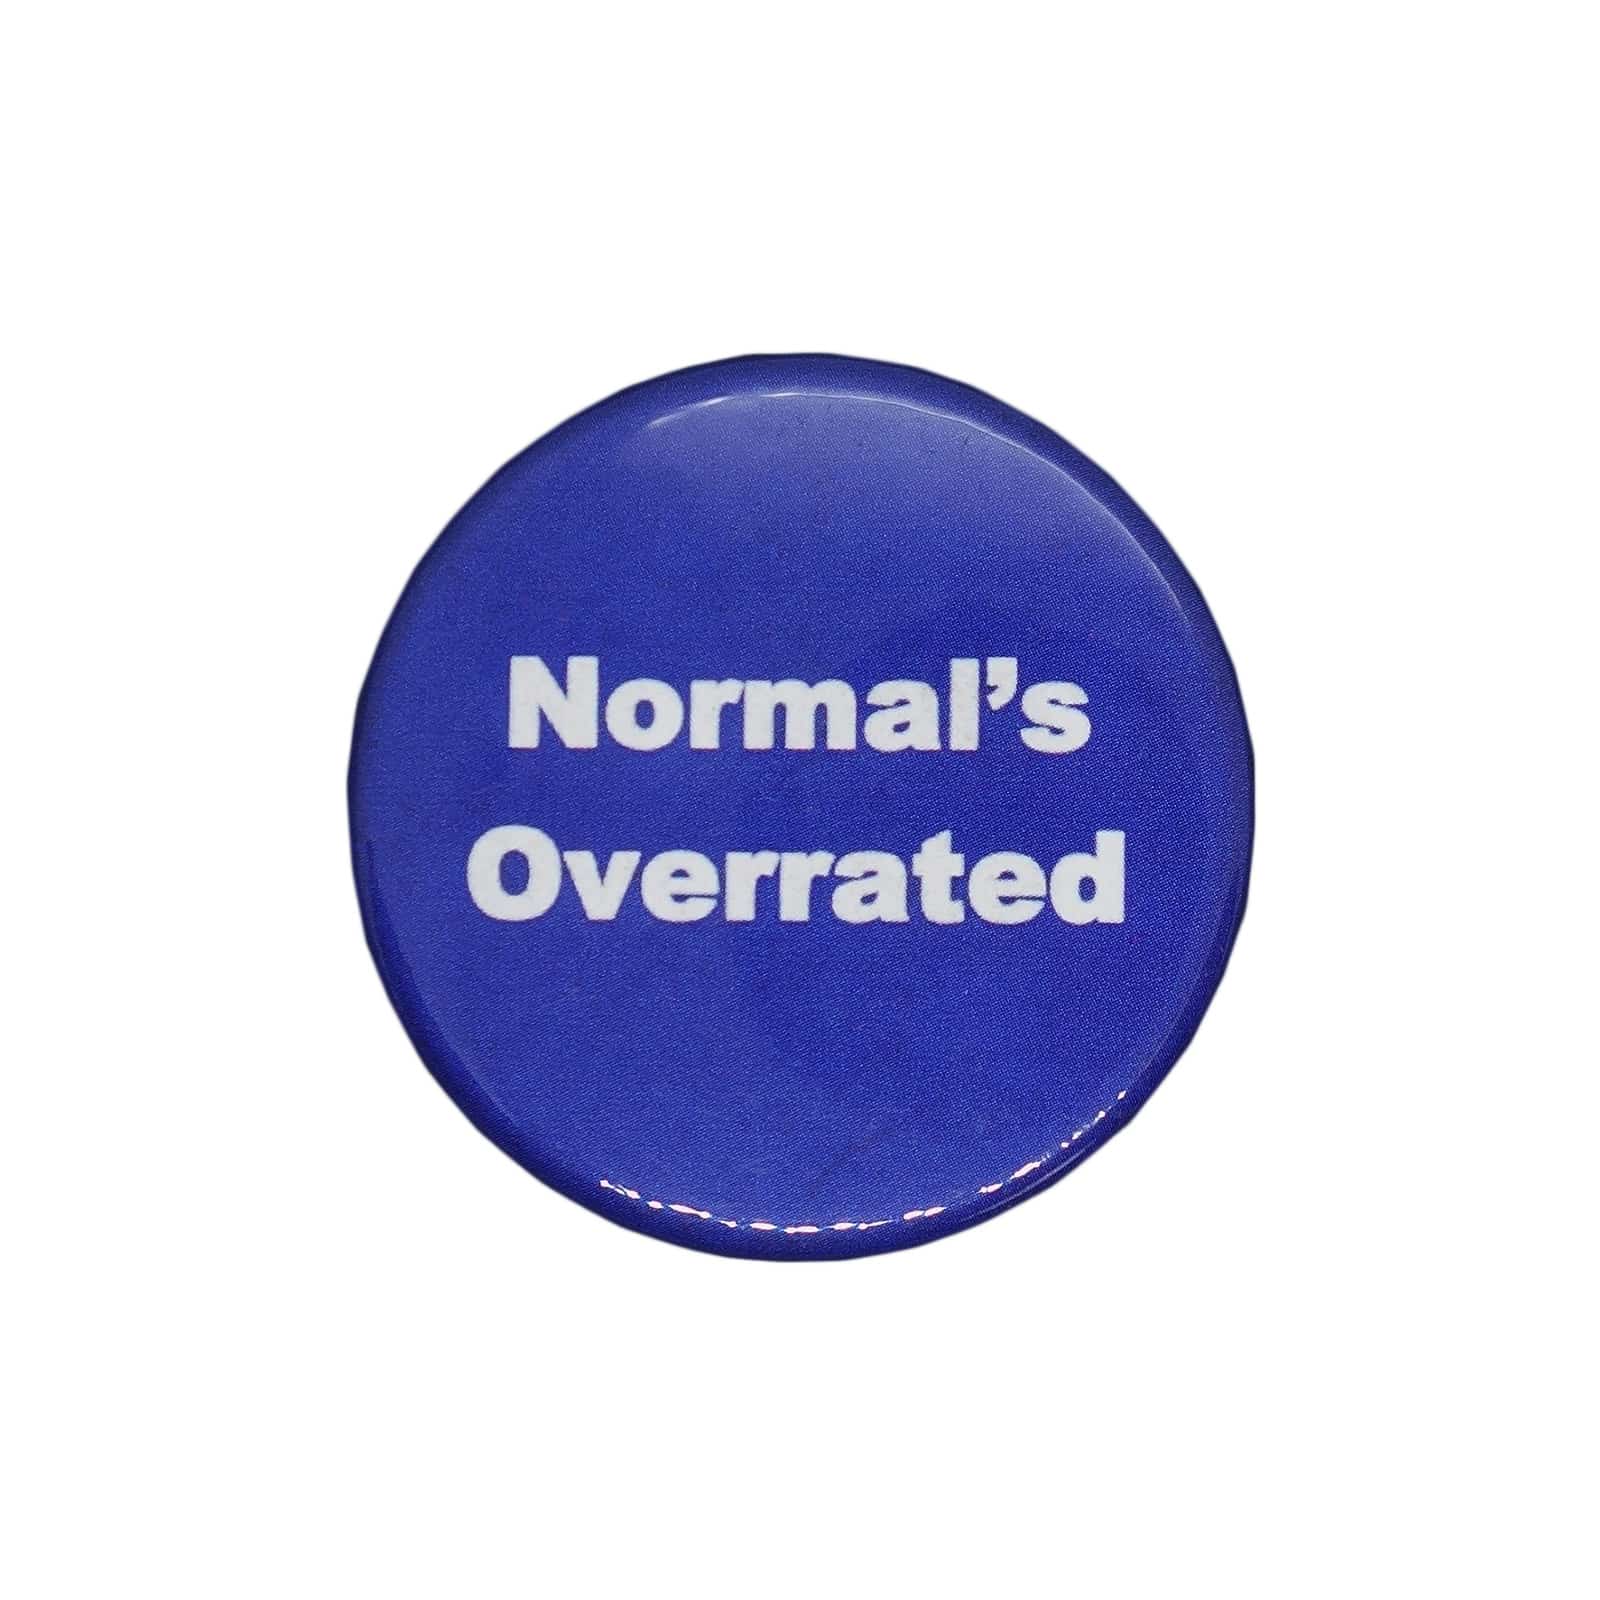 Normal's Overrated 缶バッジ バッチ